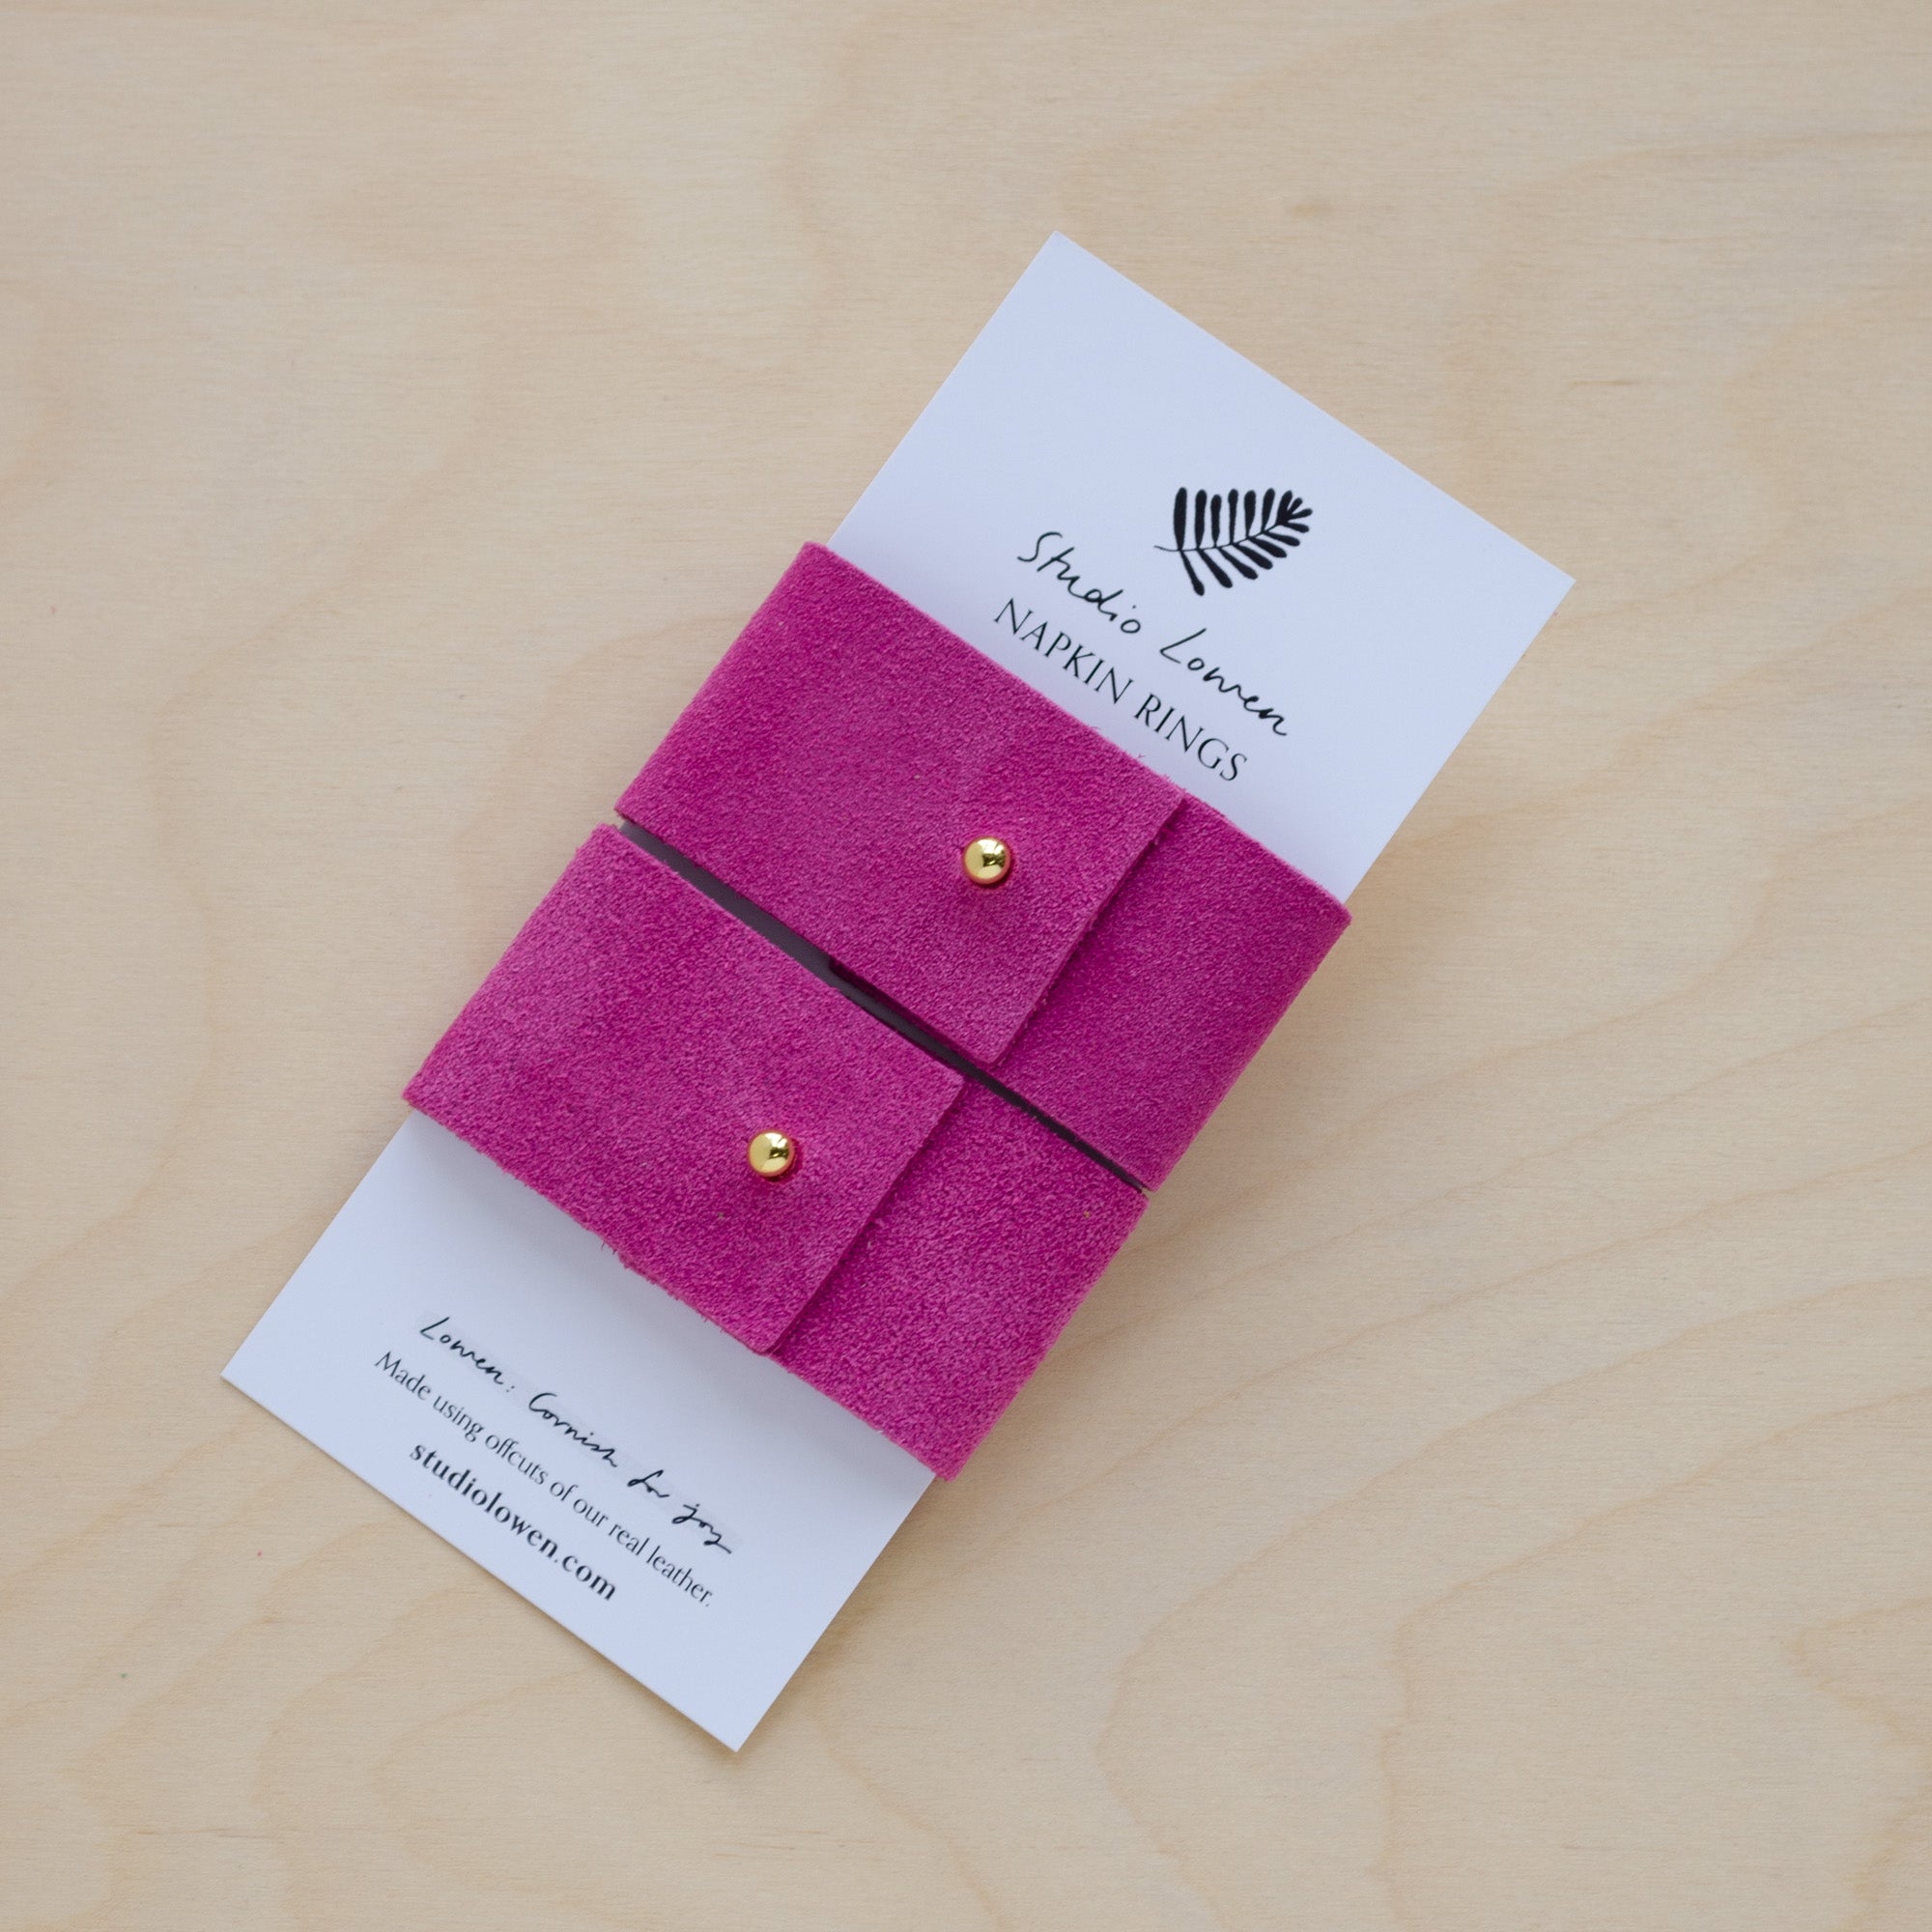 Pair of Bright fuchsia pink suede napkin rings with gold stud.